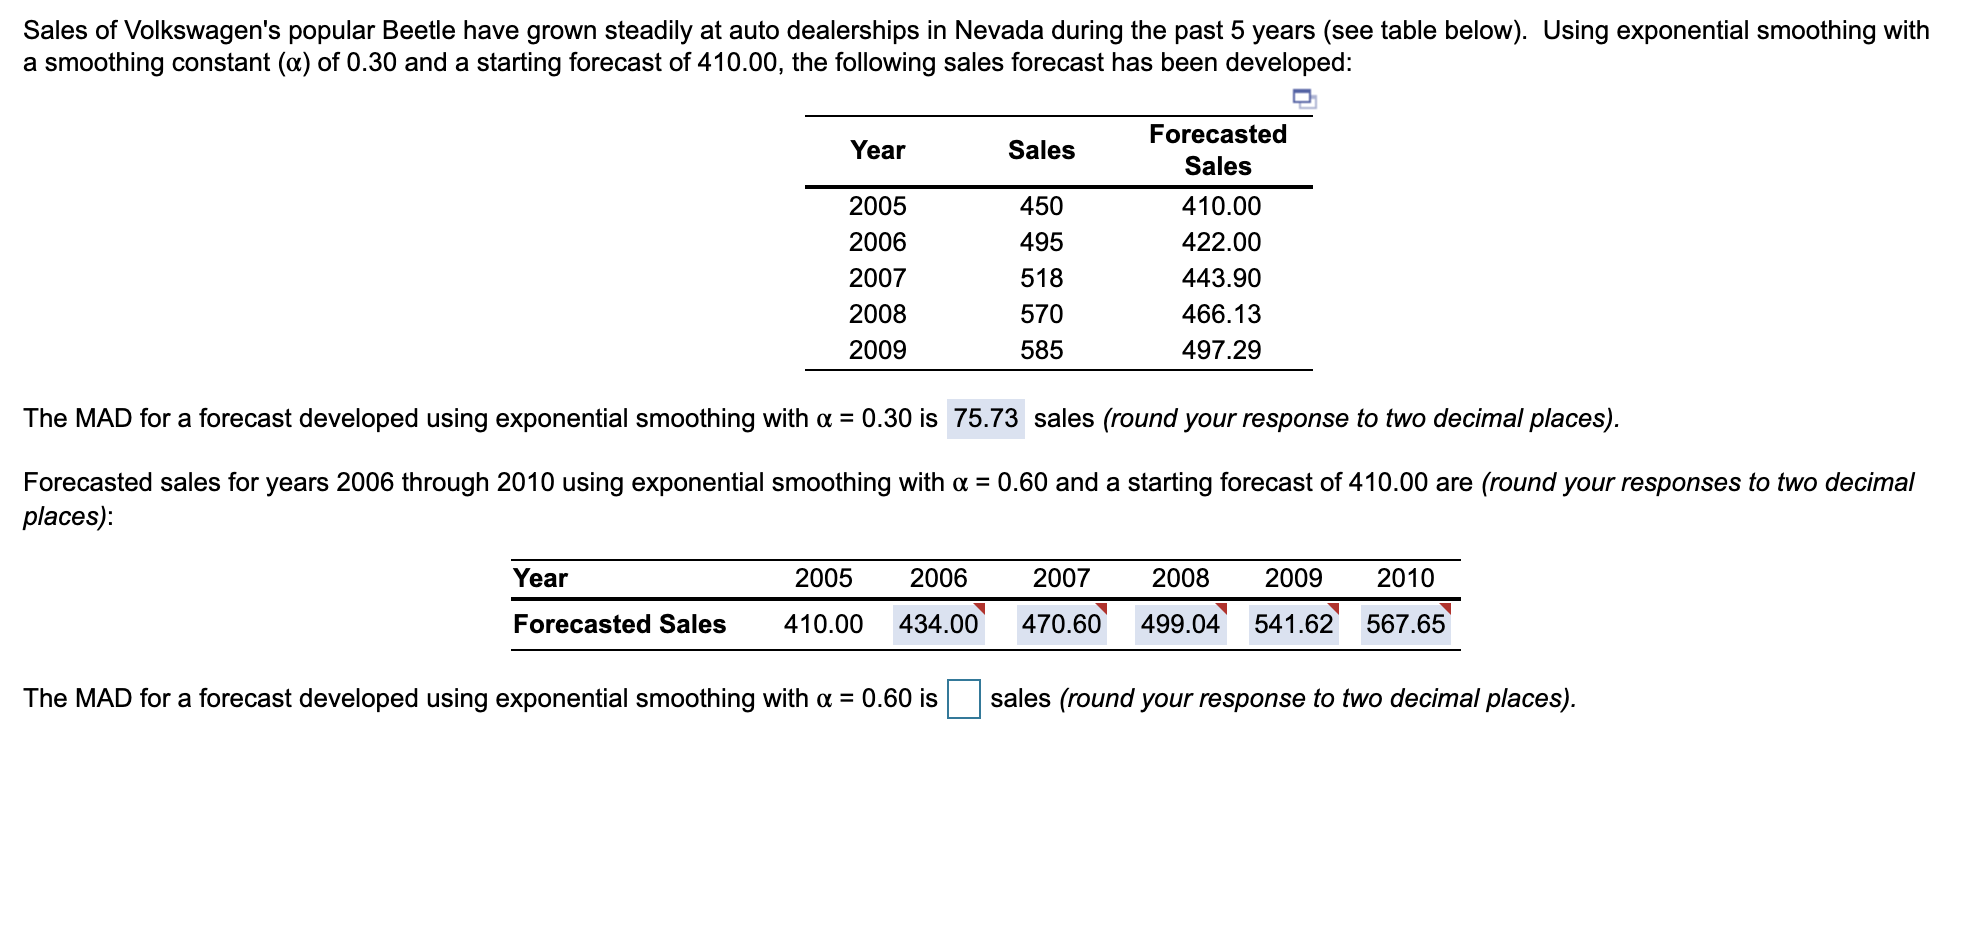 Sales of Volkswagen's popular Beetle have grown steadily at auto dealerships in Nevada during the past 5 years (see table below). Using exponential smoothing with
a smoothing constant (a) of 0.30 and a starting forecast of 410.00, the following sales forecast has been developed:
Forecasted
Year
Sales
Sales
2005
450
410.00
2006
495
422.00
2007
518
443.90
2008
570
466.13
2009
585
497.29
The MAD for a forecast developed using exponential smoothing with a = 0.30 is 75.73 sales (round your response to two decimal places).
Forecasted sales for years 2006 through 2010 using exponential smoothing with a = 0.60 and a starting forecast of 410.00 are (round your responses to two decimal
places):
Year
2005
2006
2007
2008
2009
2010
Forecasted Sales
410.00
434.00 470.60 499.04 541.62
567.65
The MAD for a forecast developed using exponential smoothing with a = 0.60 is
sales (round your response to two decimal places).
